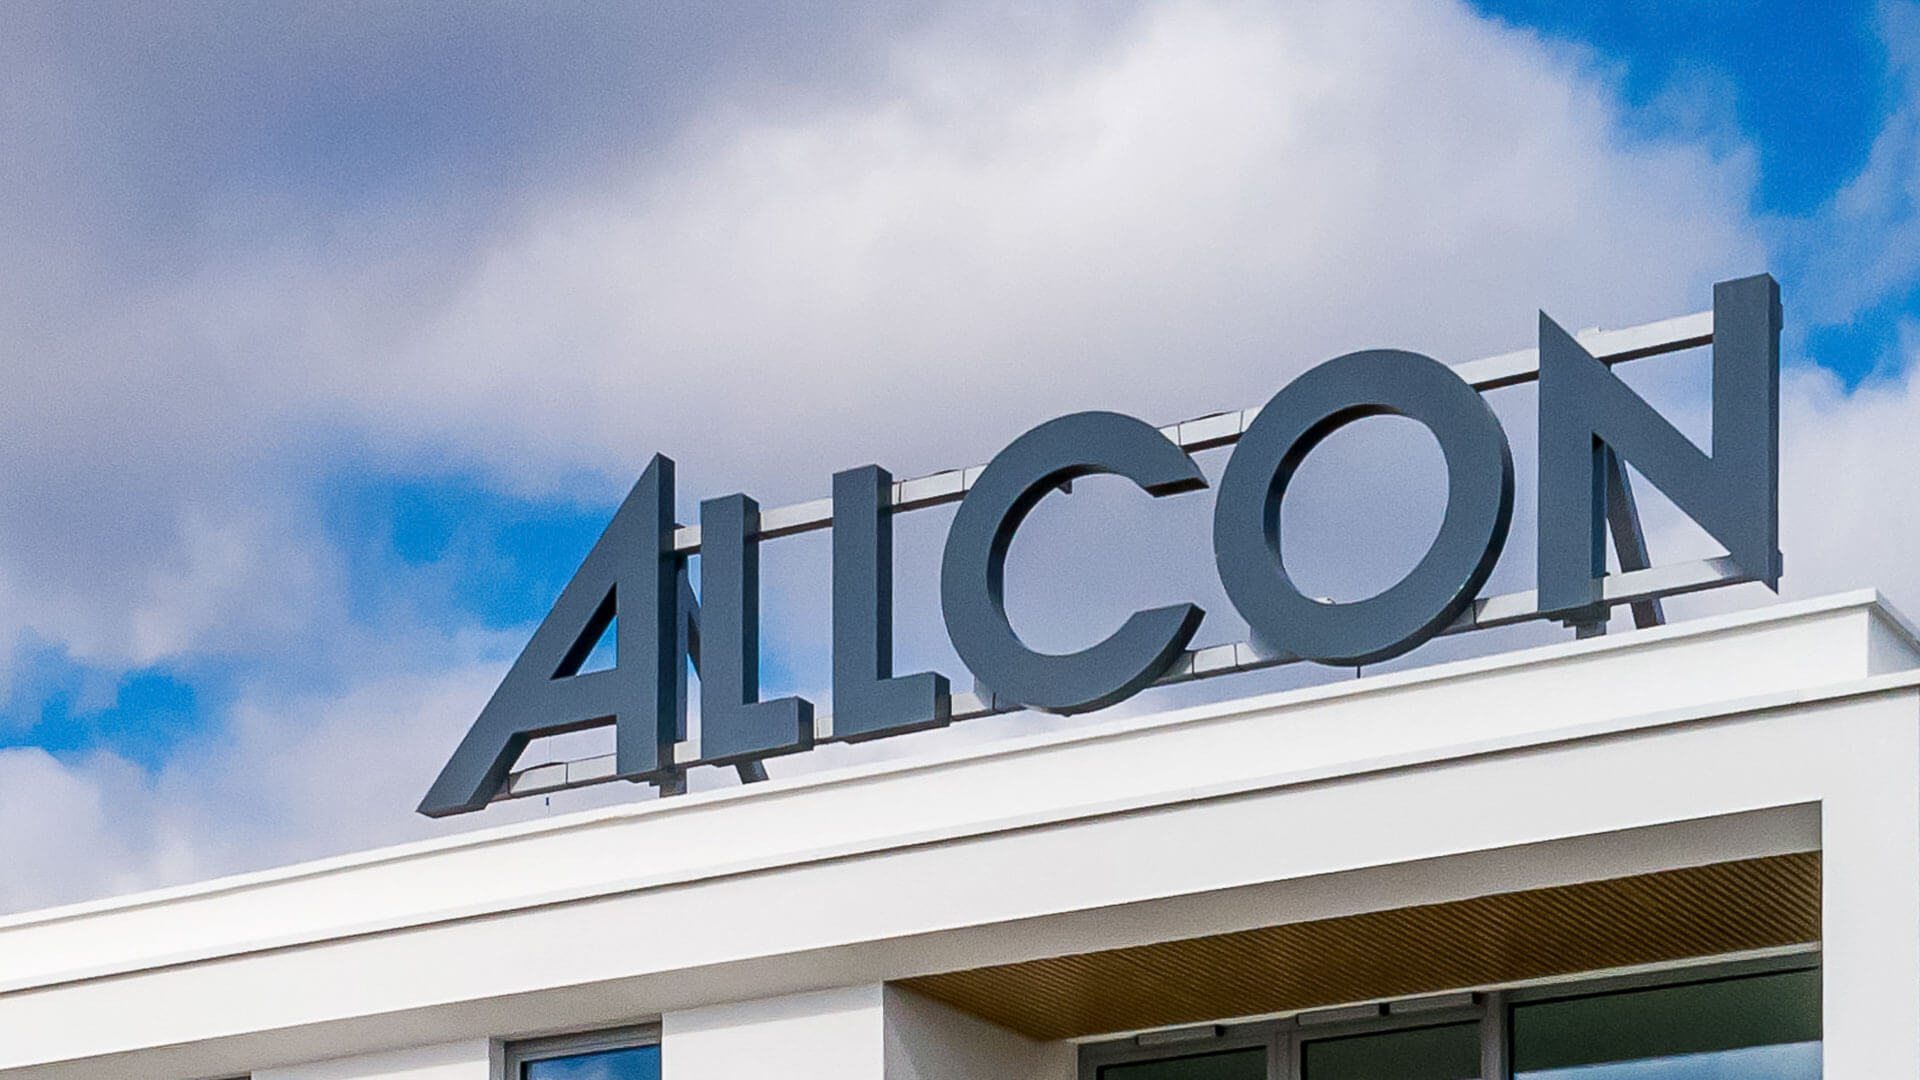 allcon-litre-formato grande - allcon-literal-literal lettering-3D-made-of-plexi-luminescent-on-a- roof-of-a-residential-building